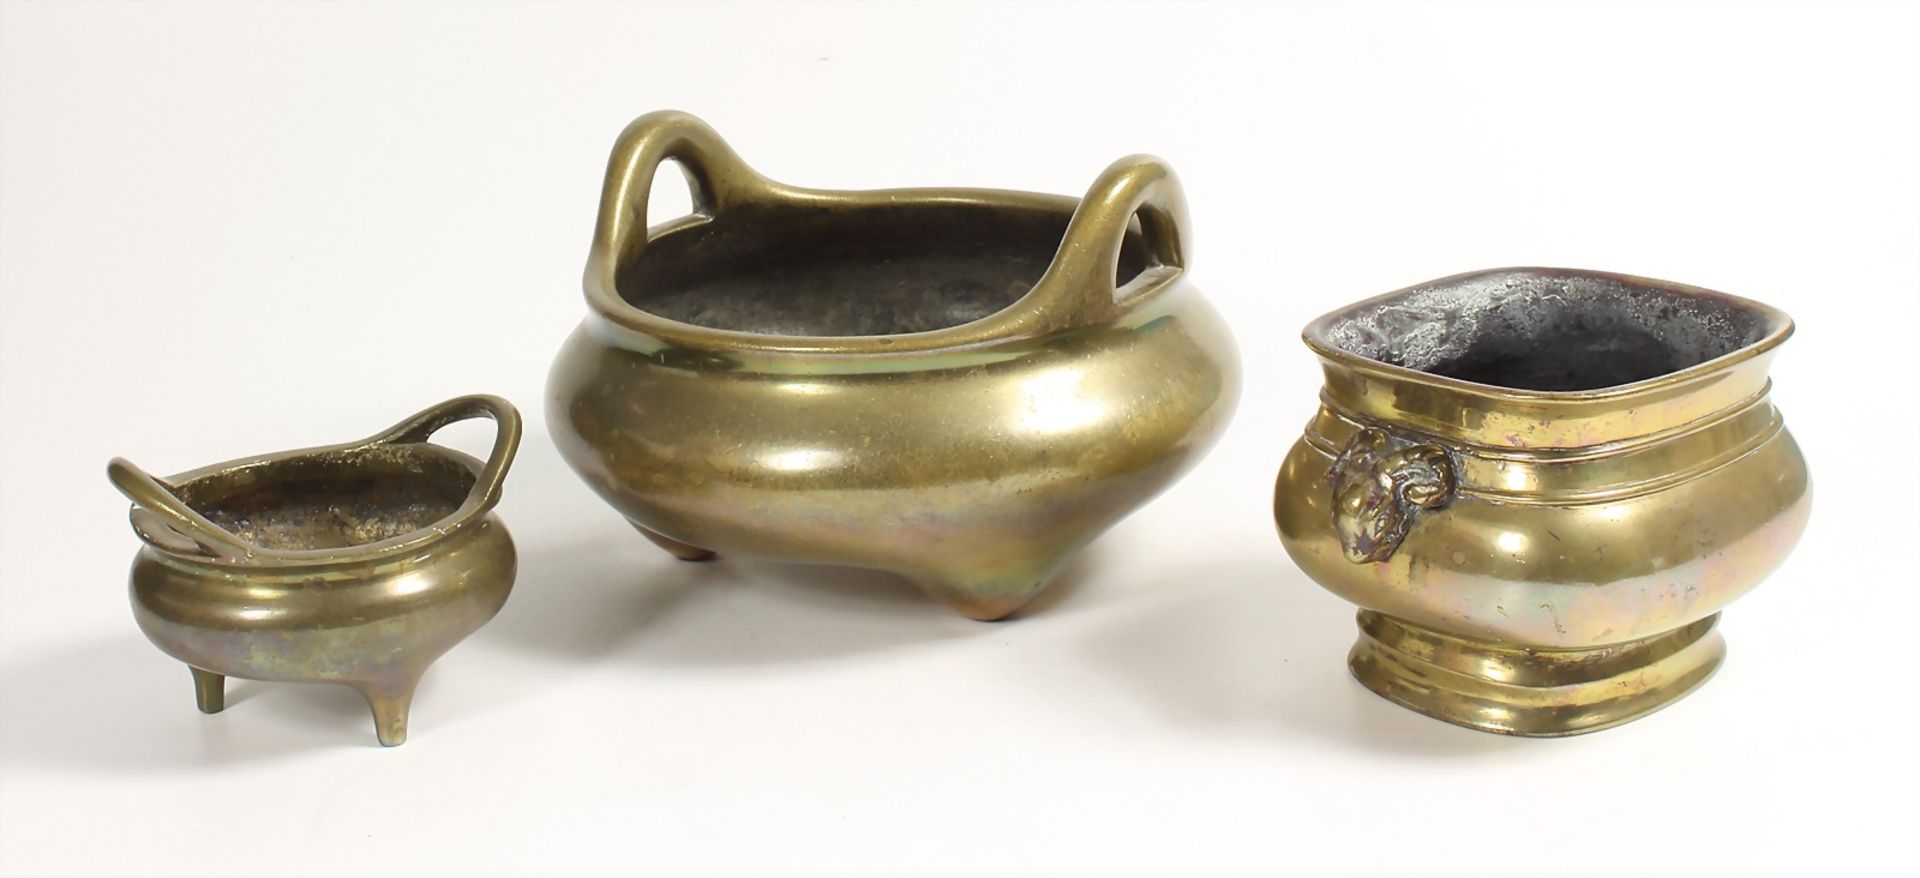 3 Chinese brass jars, first half of the 20th century, down below at bottom cast trademarks, small